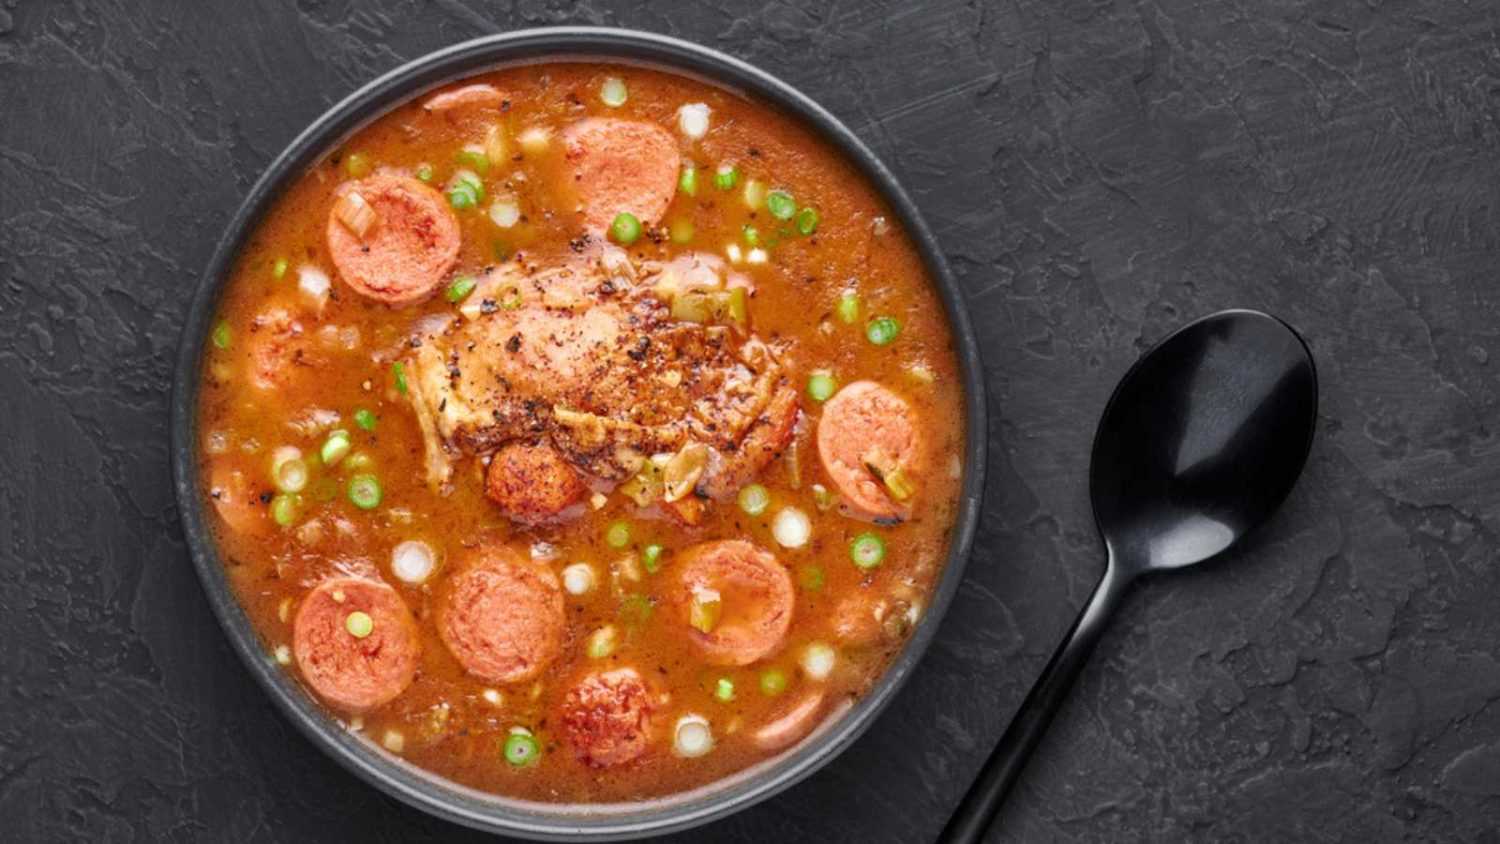 Chicken and Sausage Gumbo soup in black bowl on dark slate backdrop. Gumbo is louisiana cajun cuisine soup with roux. American USA Food. Traditional ethnic meal